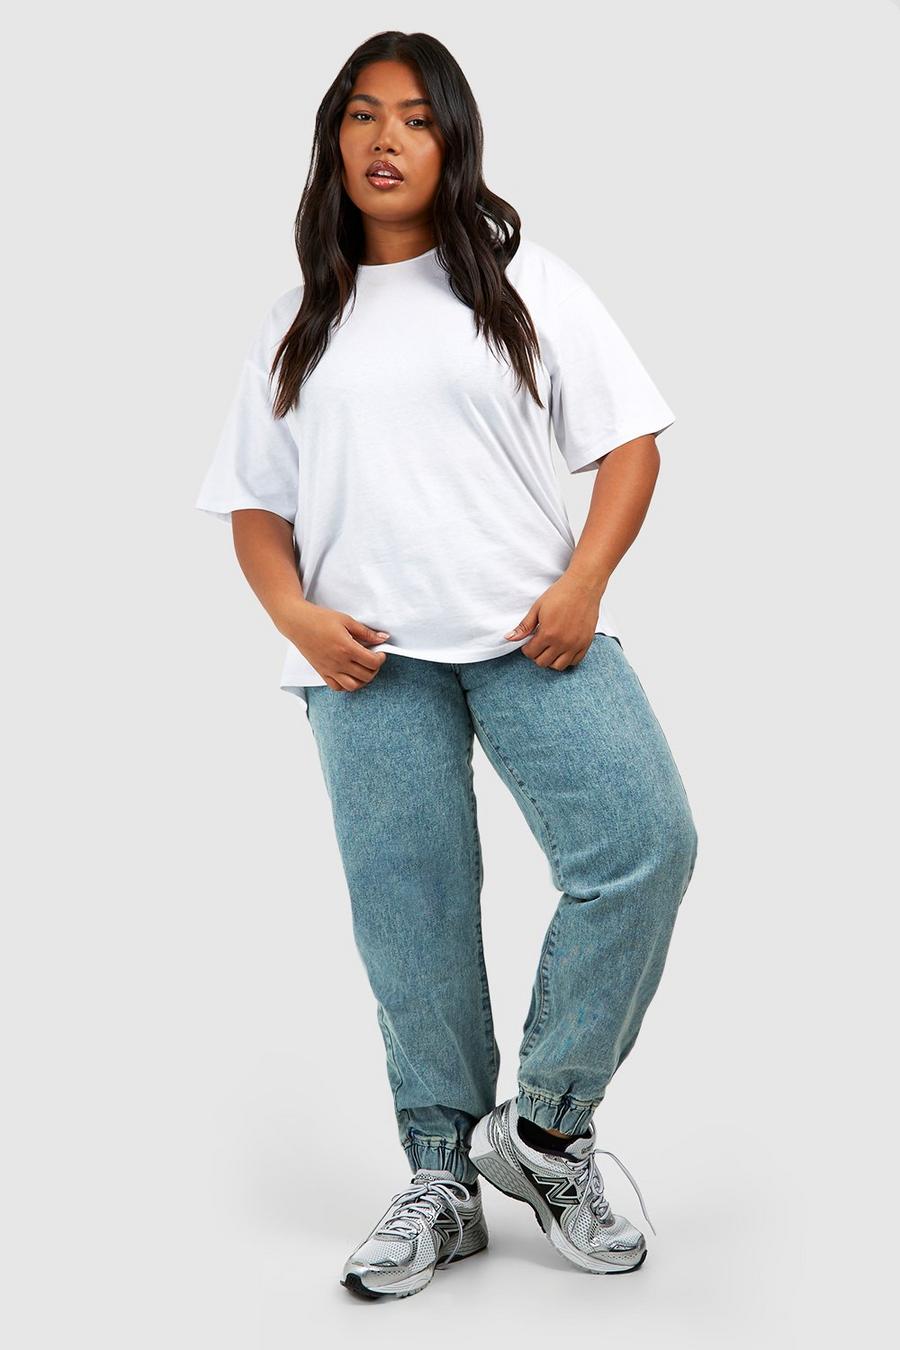 Mom jeans or joggers? What about both in one style?!